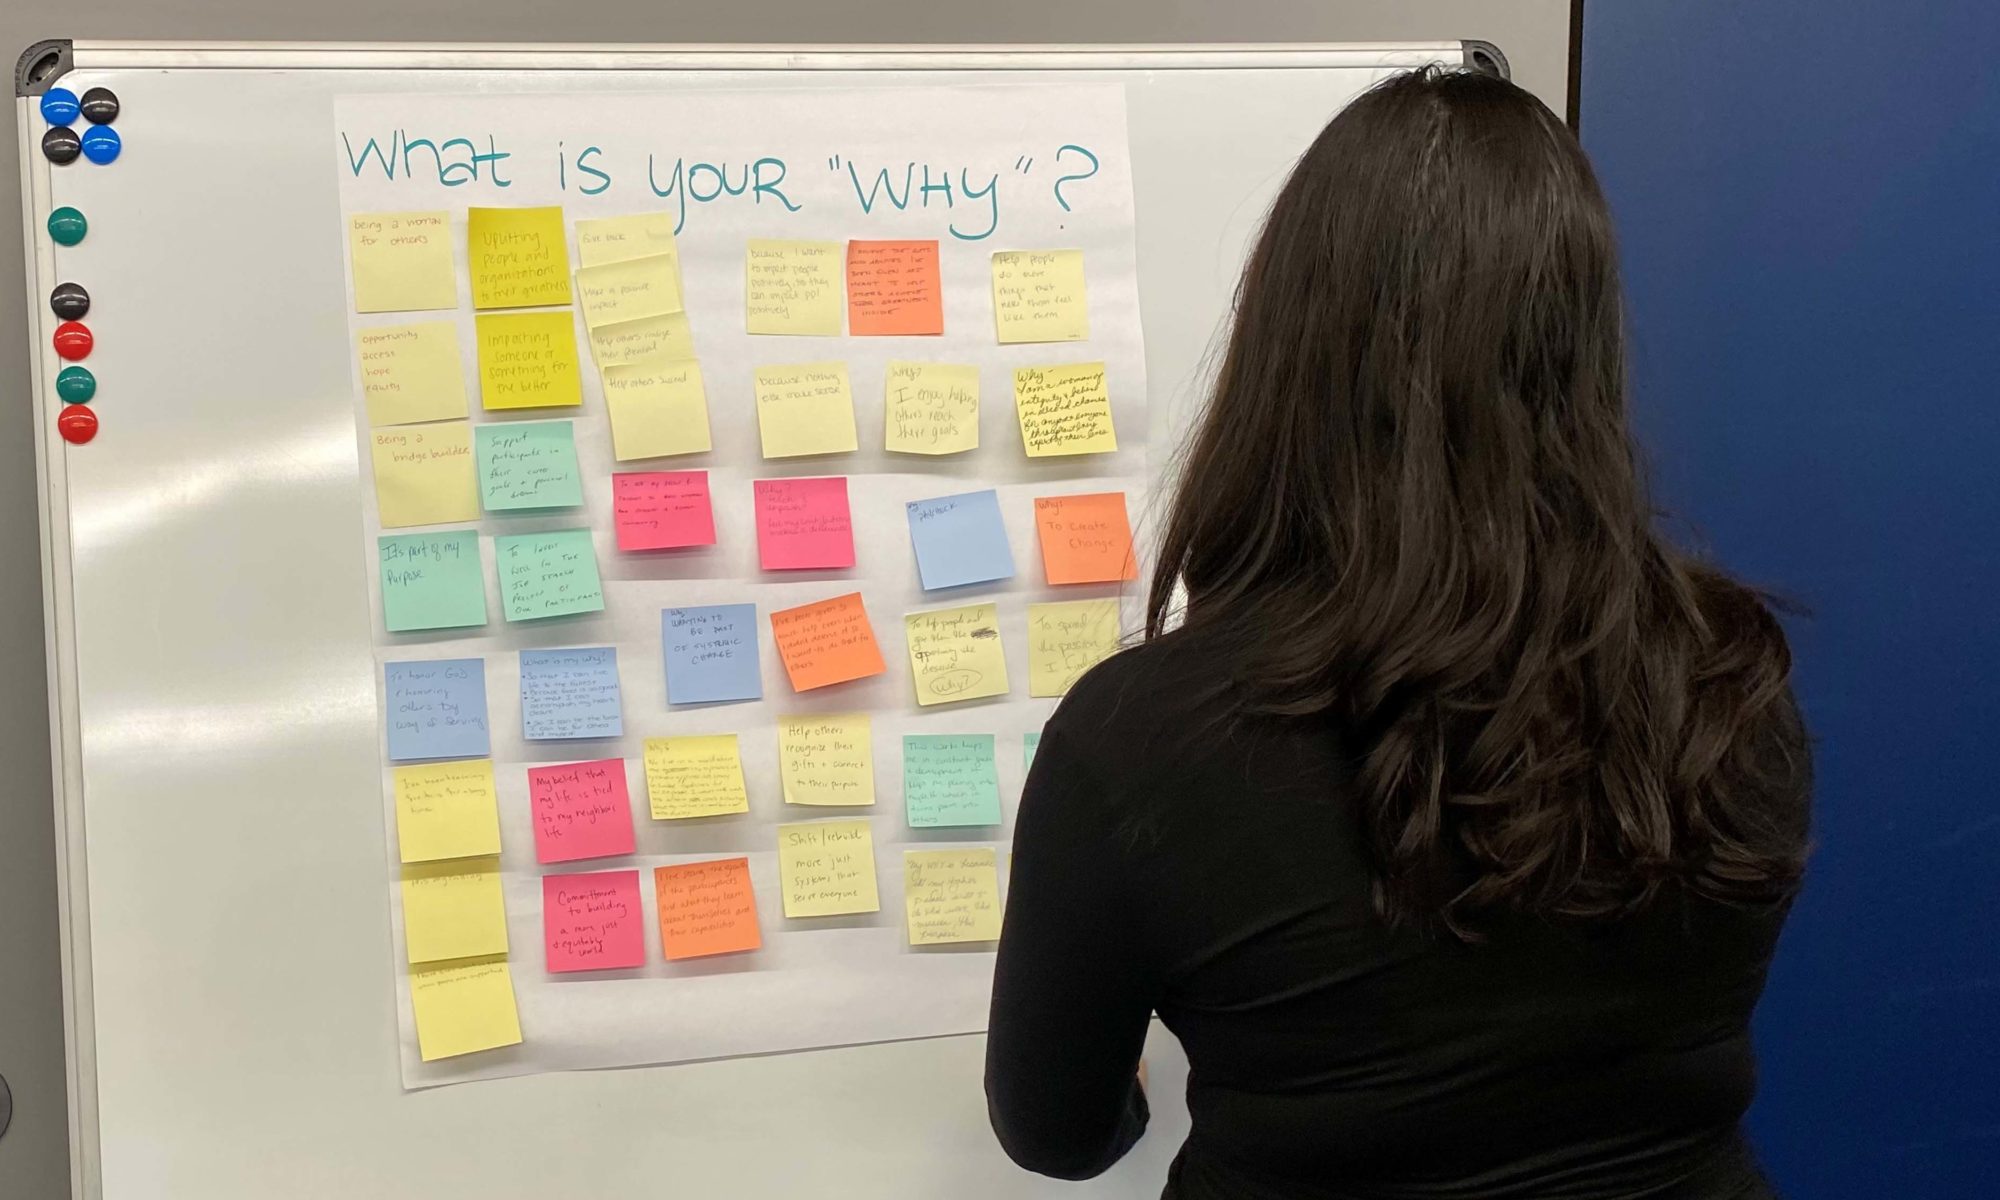 Woman looking at list of post-it notes hanging on the wall answering the question: "What is your 'why?'"